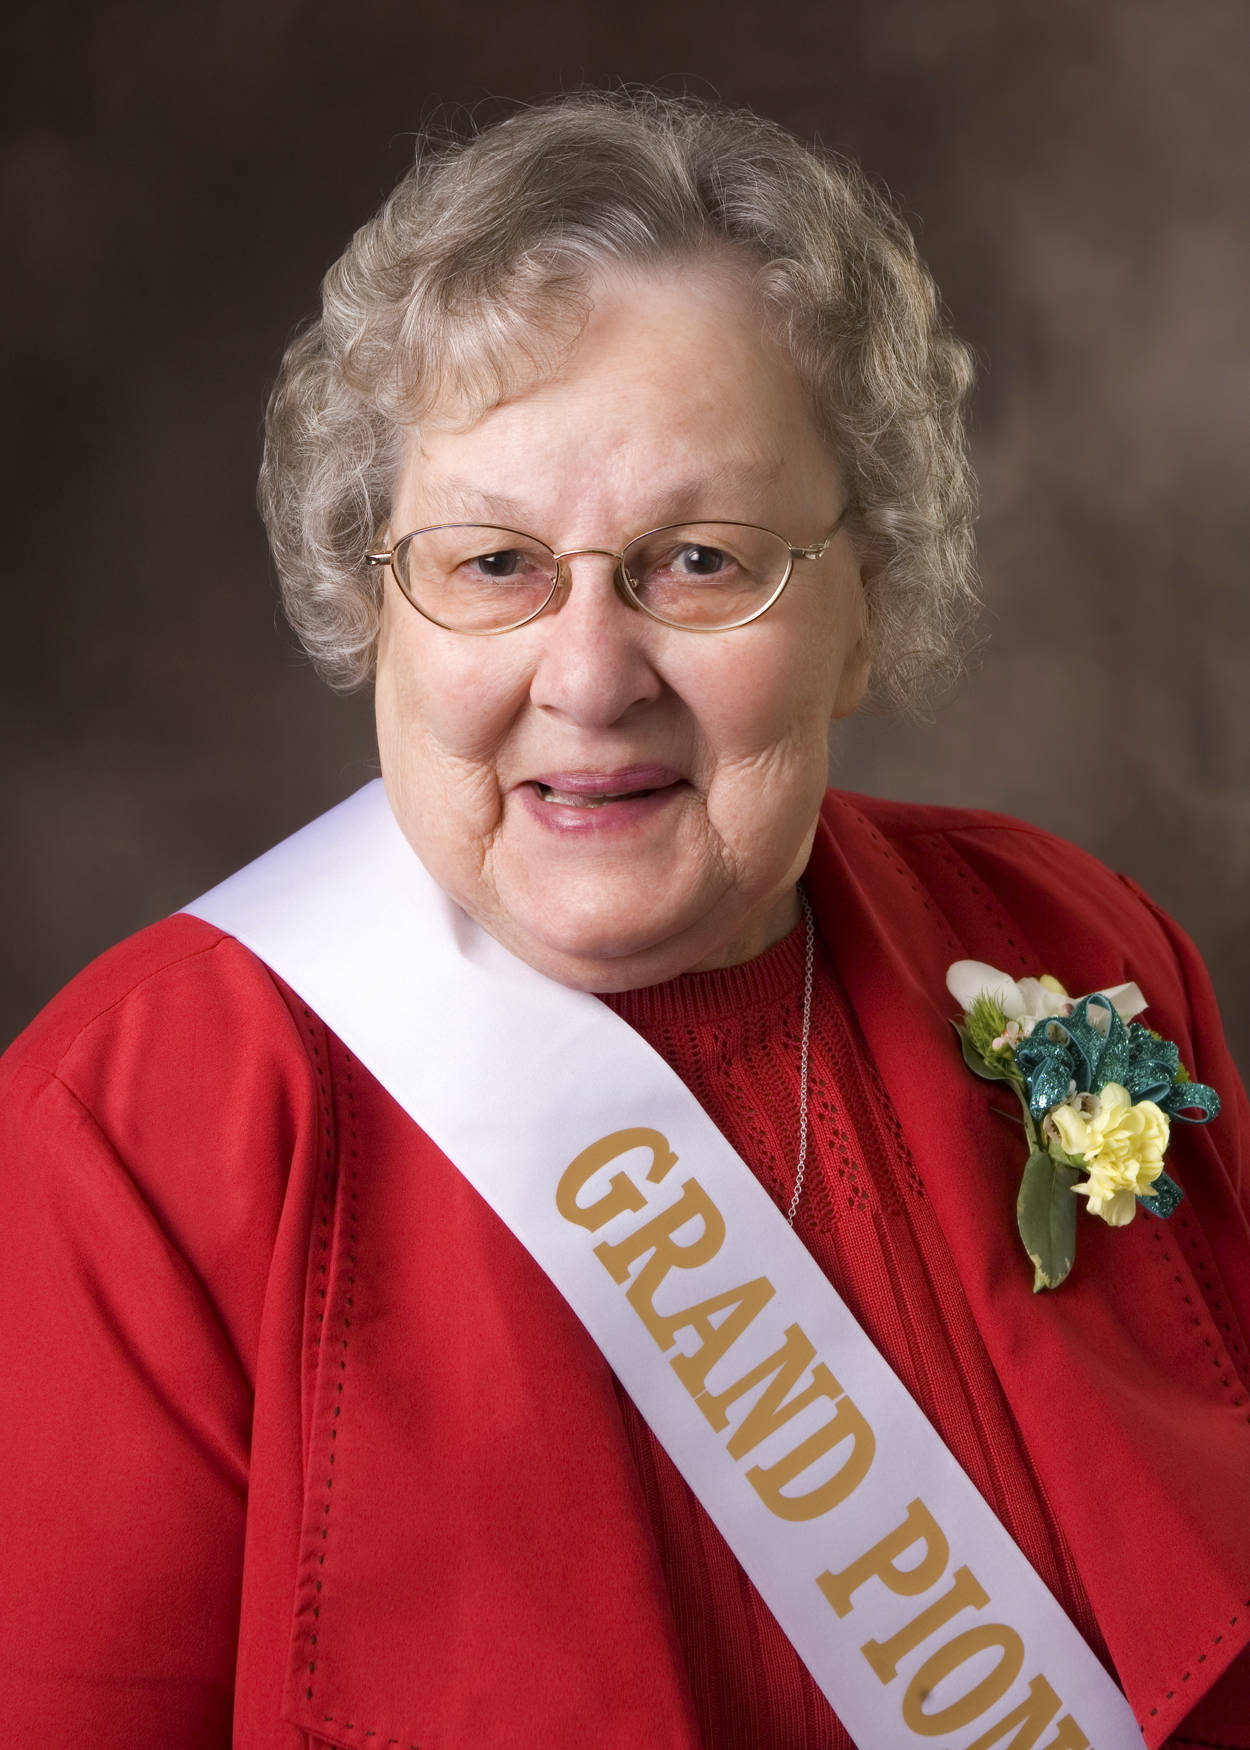 Family and friends remember Esther Heuhslein Nelson for her heart for service in the community helping with more than a dozen organizations including the Sequim-Dungeness Chamber of Commerce. A Celebration of Life is set for April 28 at the Sequim Prairie Grange. Photo by Ernst-Ulrich Schafer